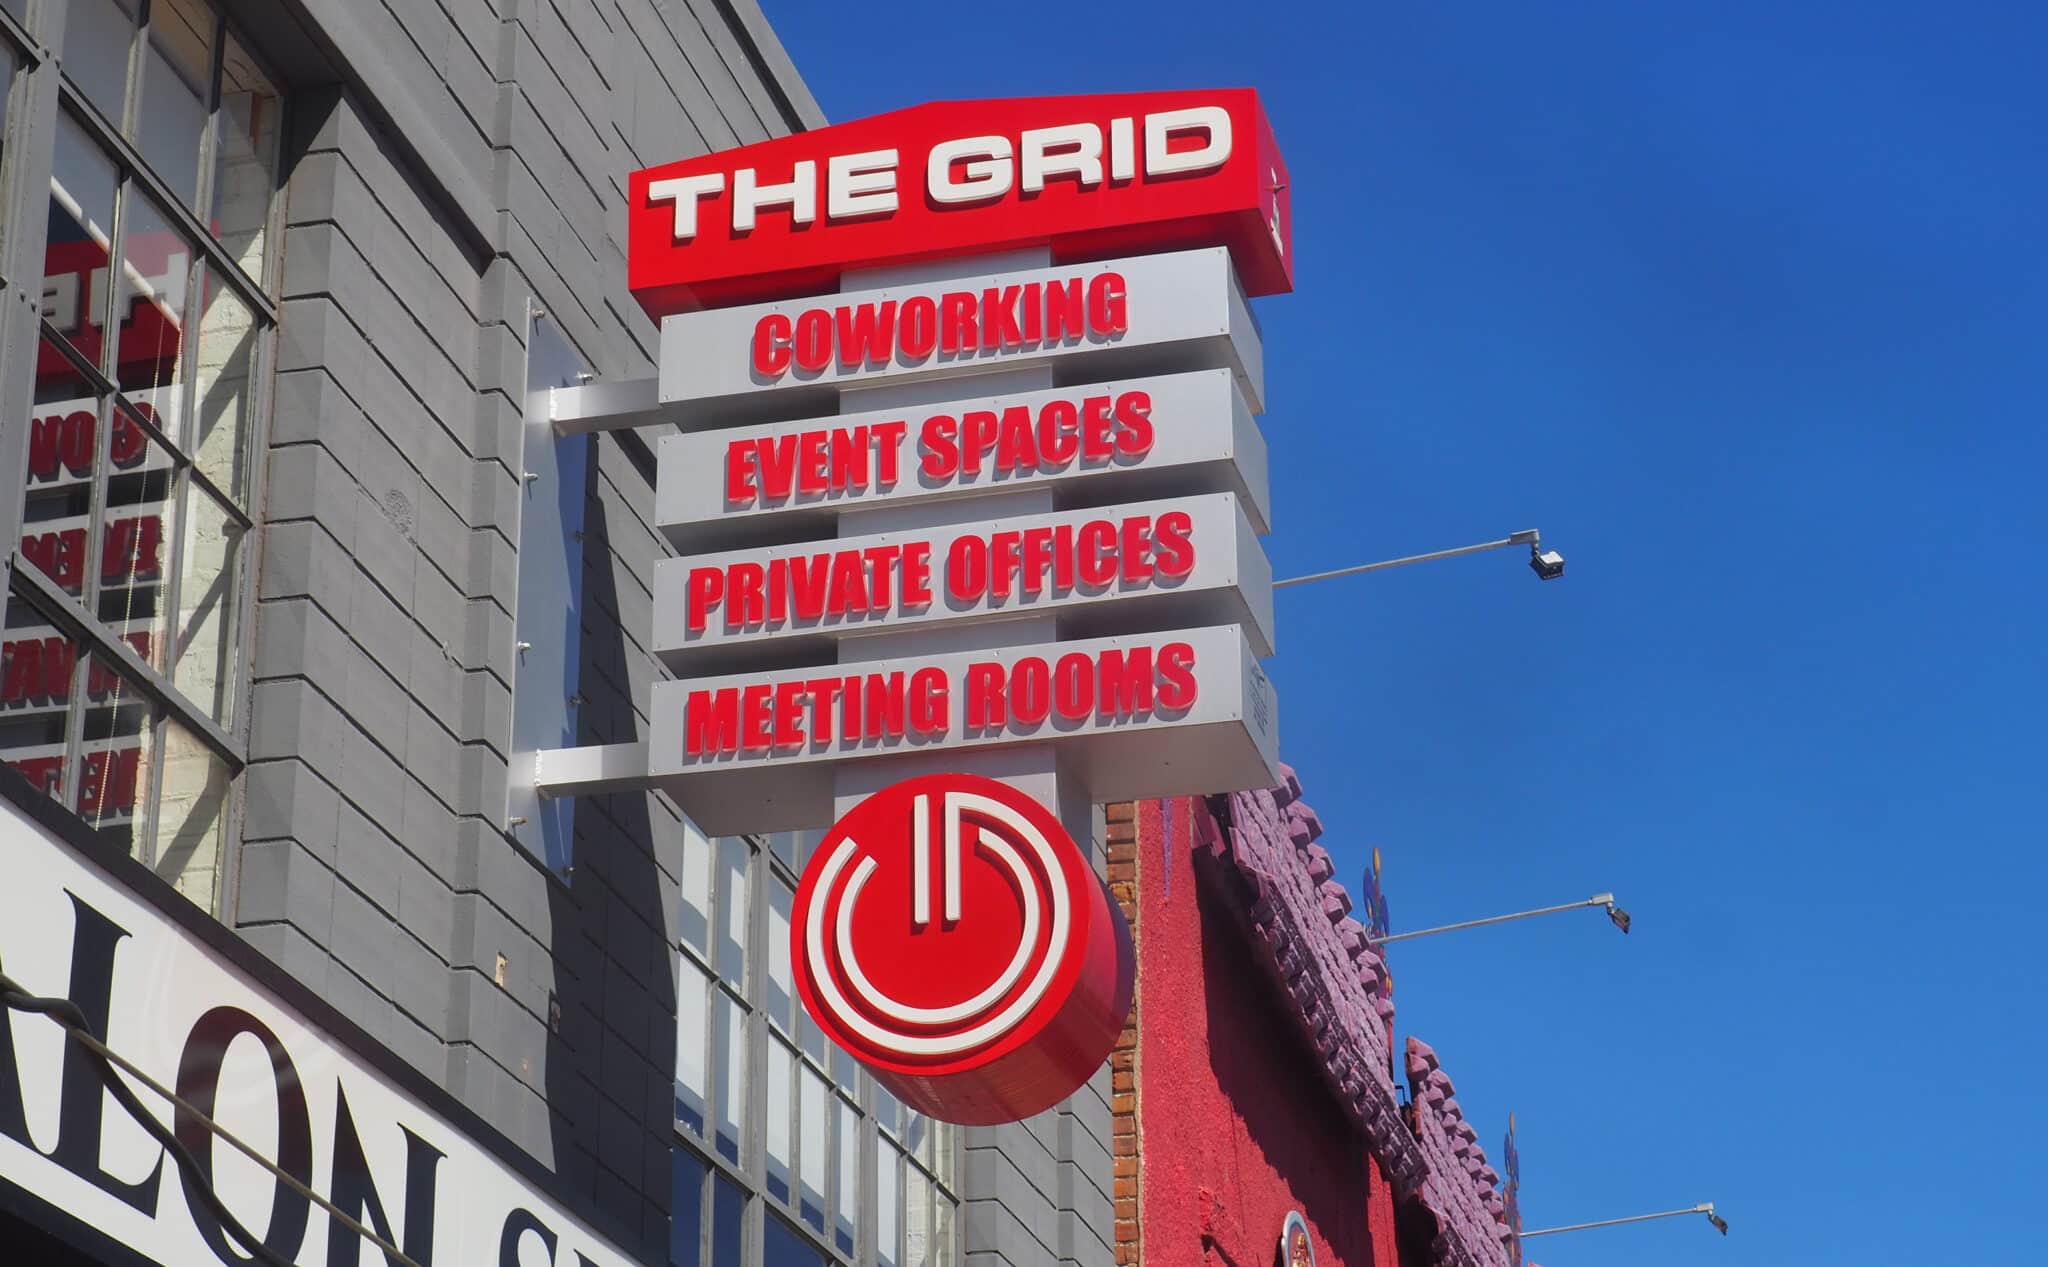 Grid wants to buy its Denver building